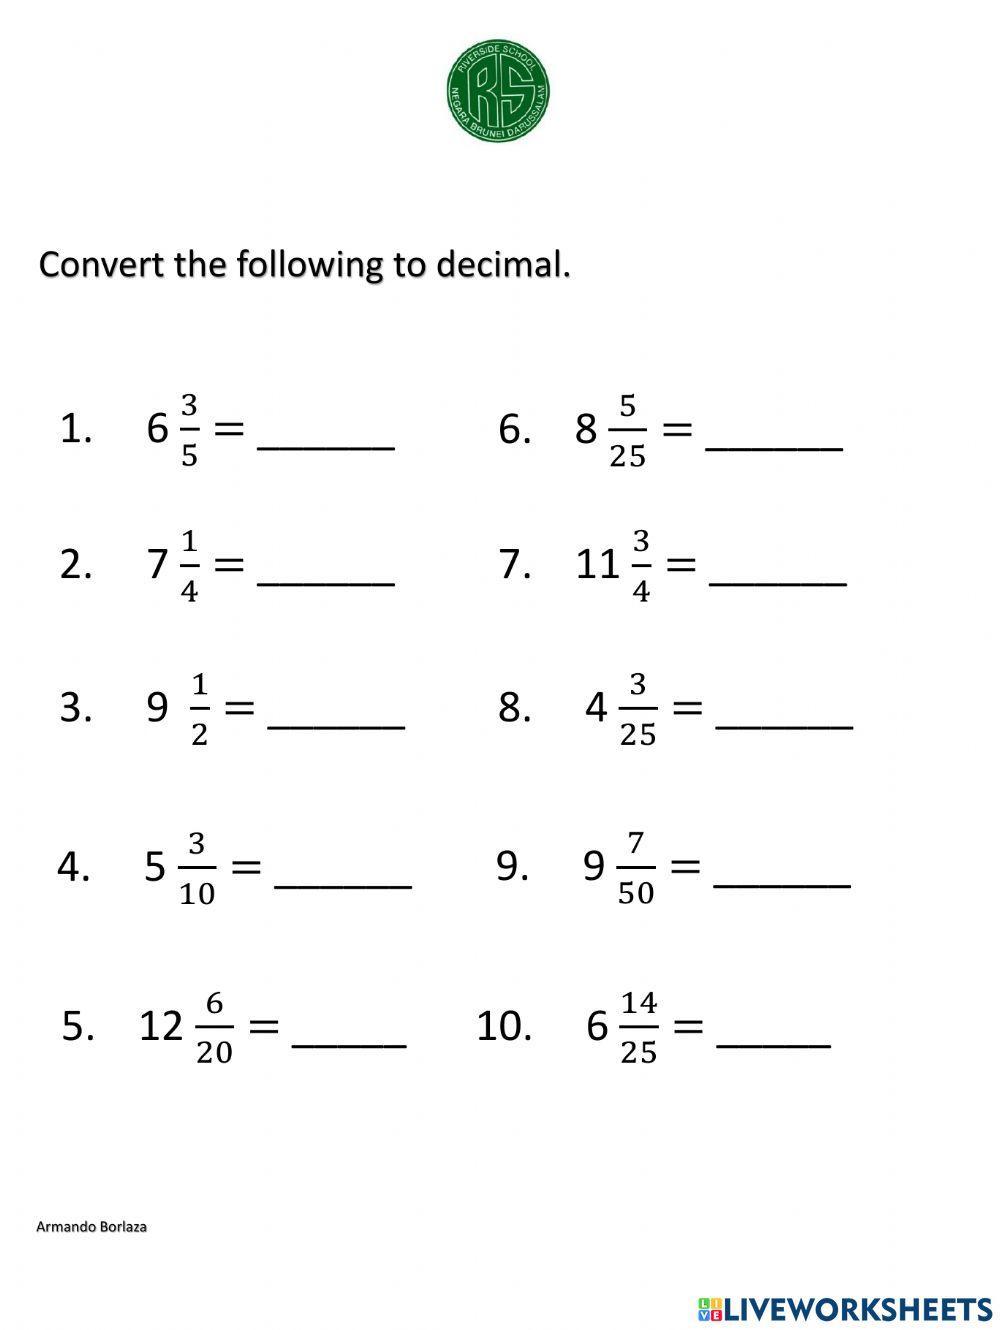 Converting Mixed Number to Decimal